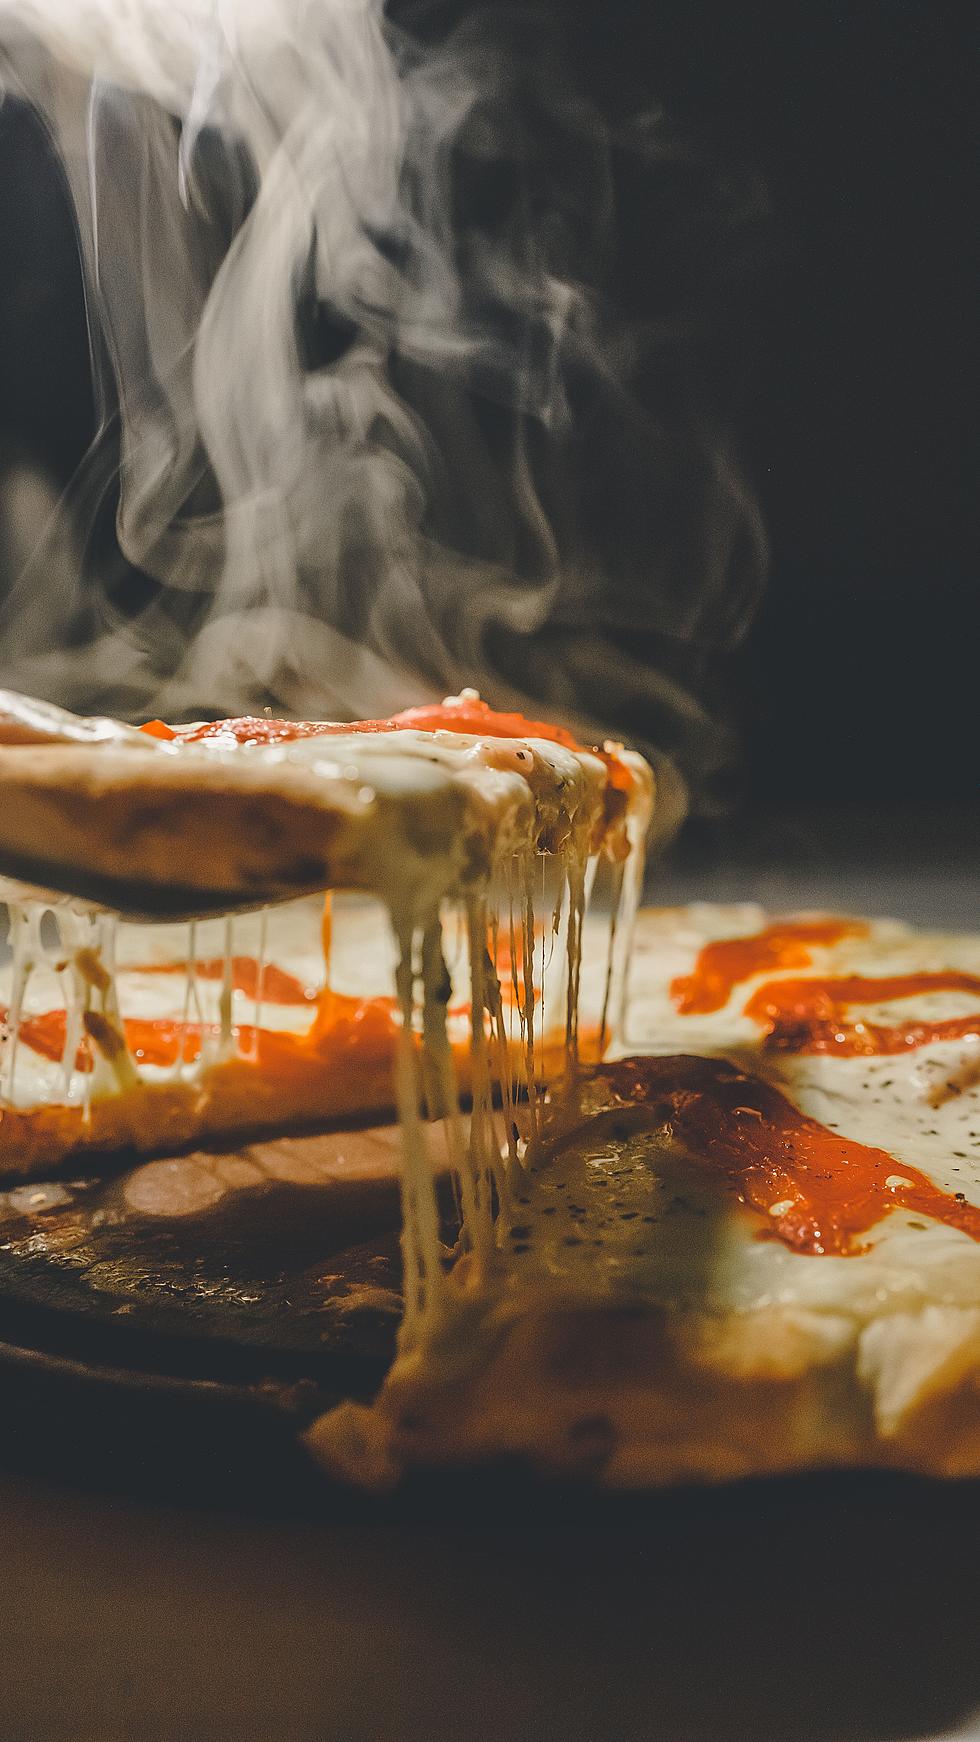 Anything goes when it comes to pizza at this creative NJ restaurant